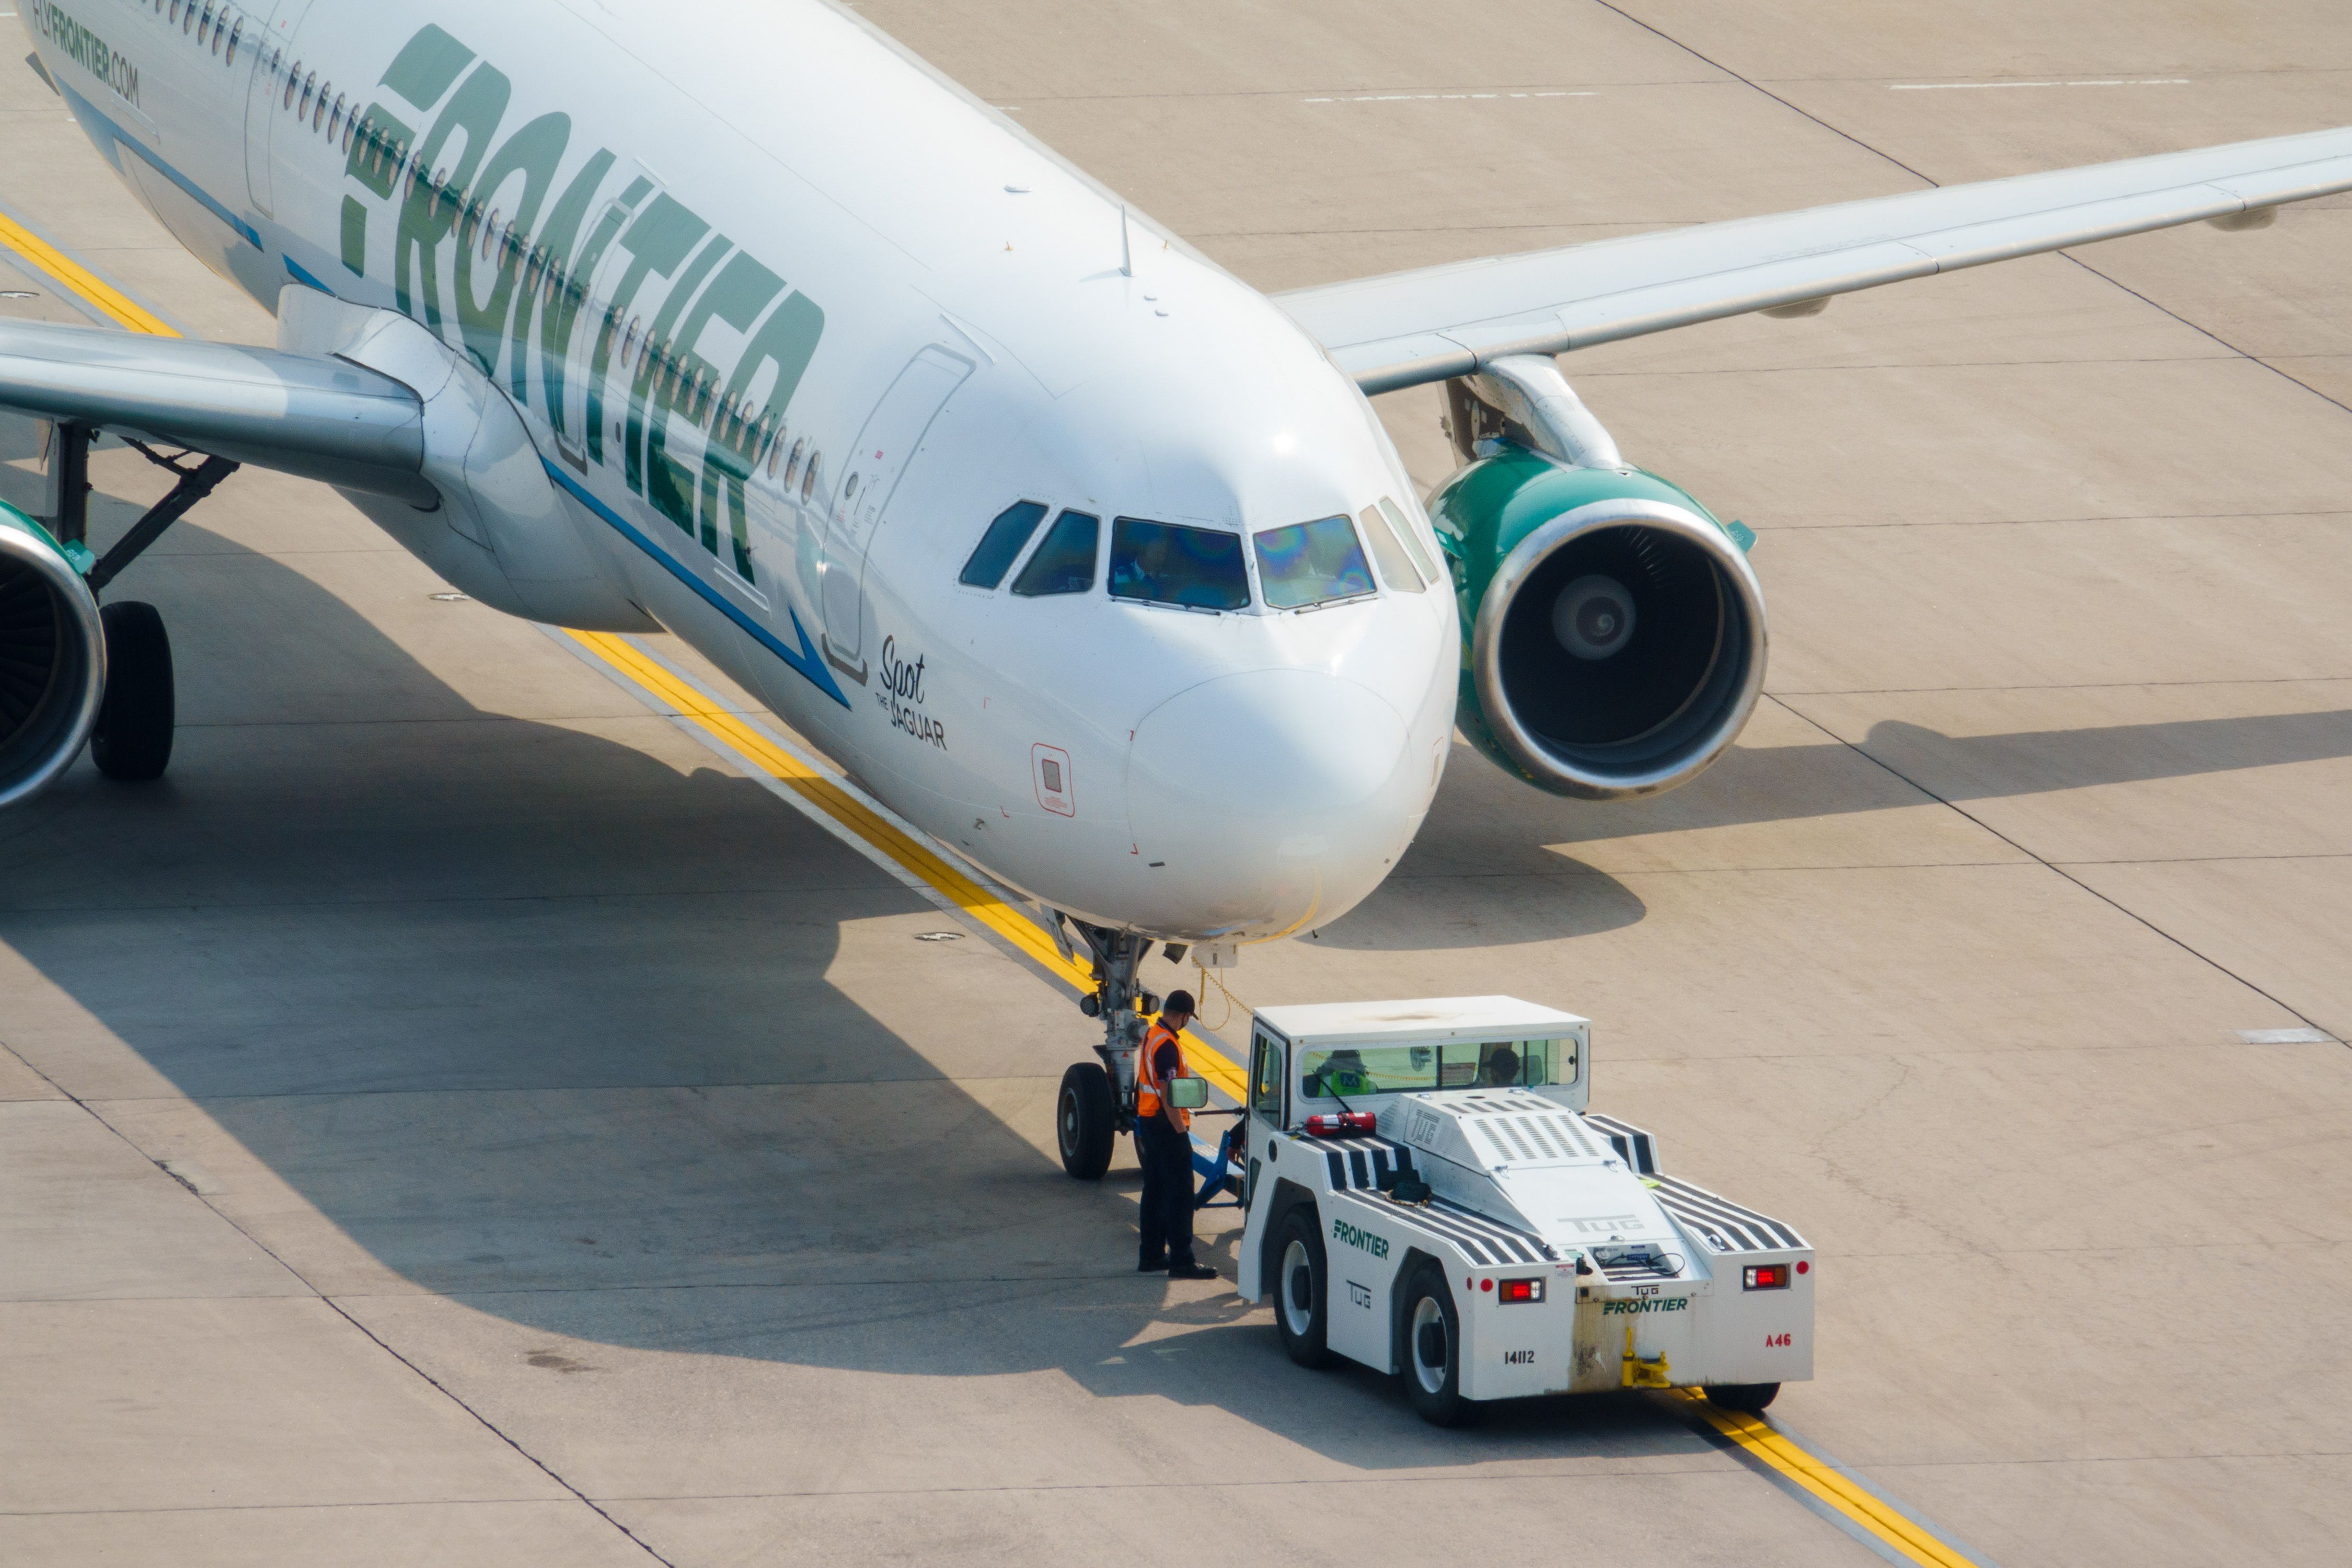 A Frontier Airlines plane being towed by a tug